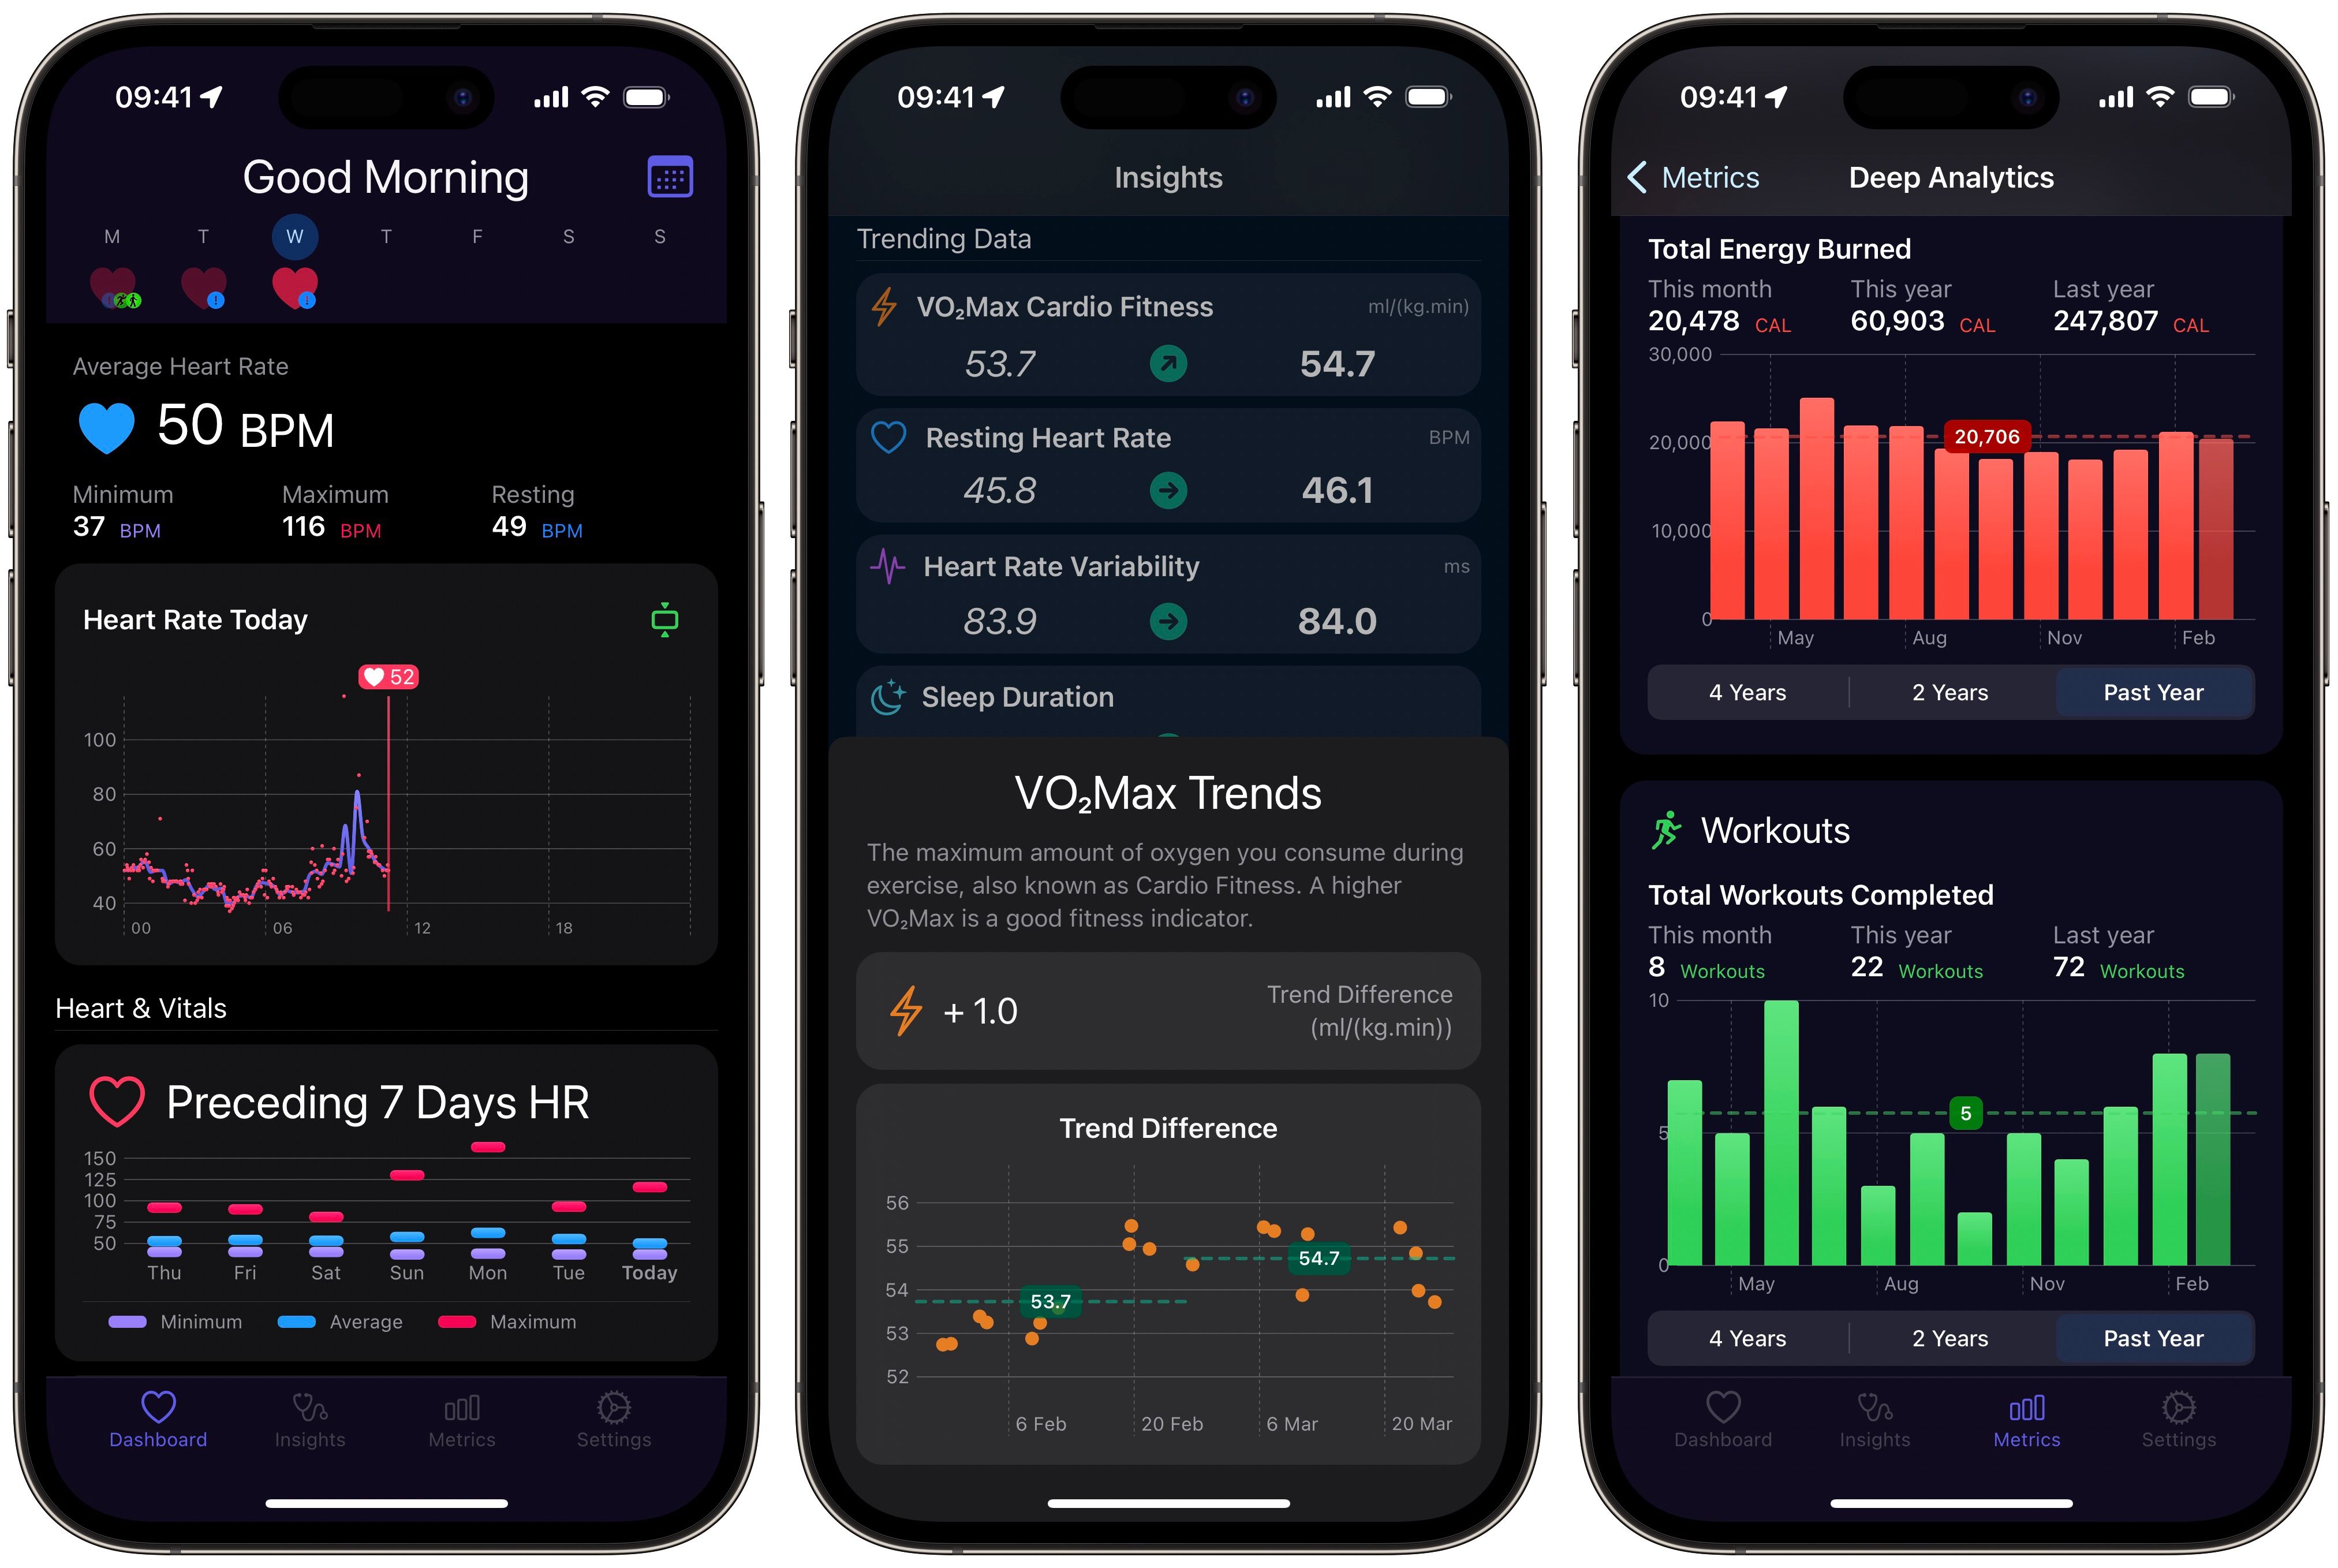 Heart Analyzer v10 Brings New Dashboard and Watch App Experience with Enhanced Swift Charts - macrumors.com